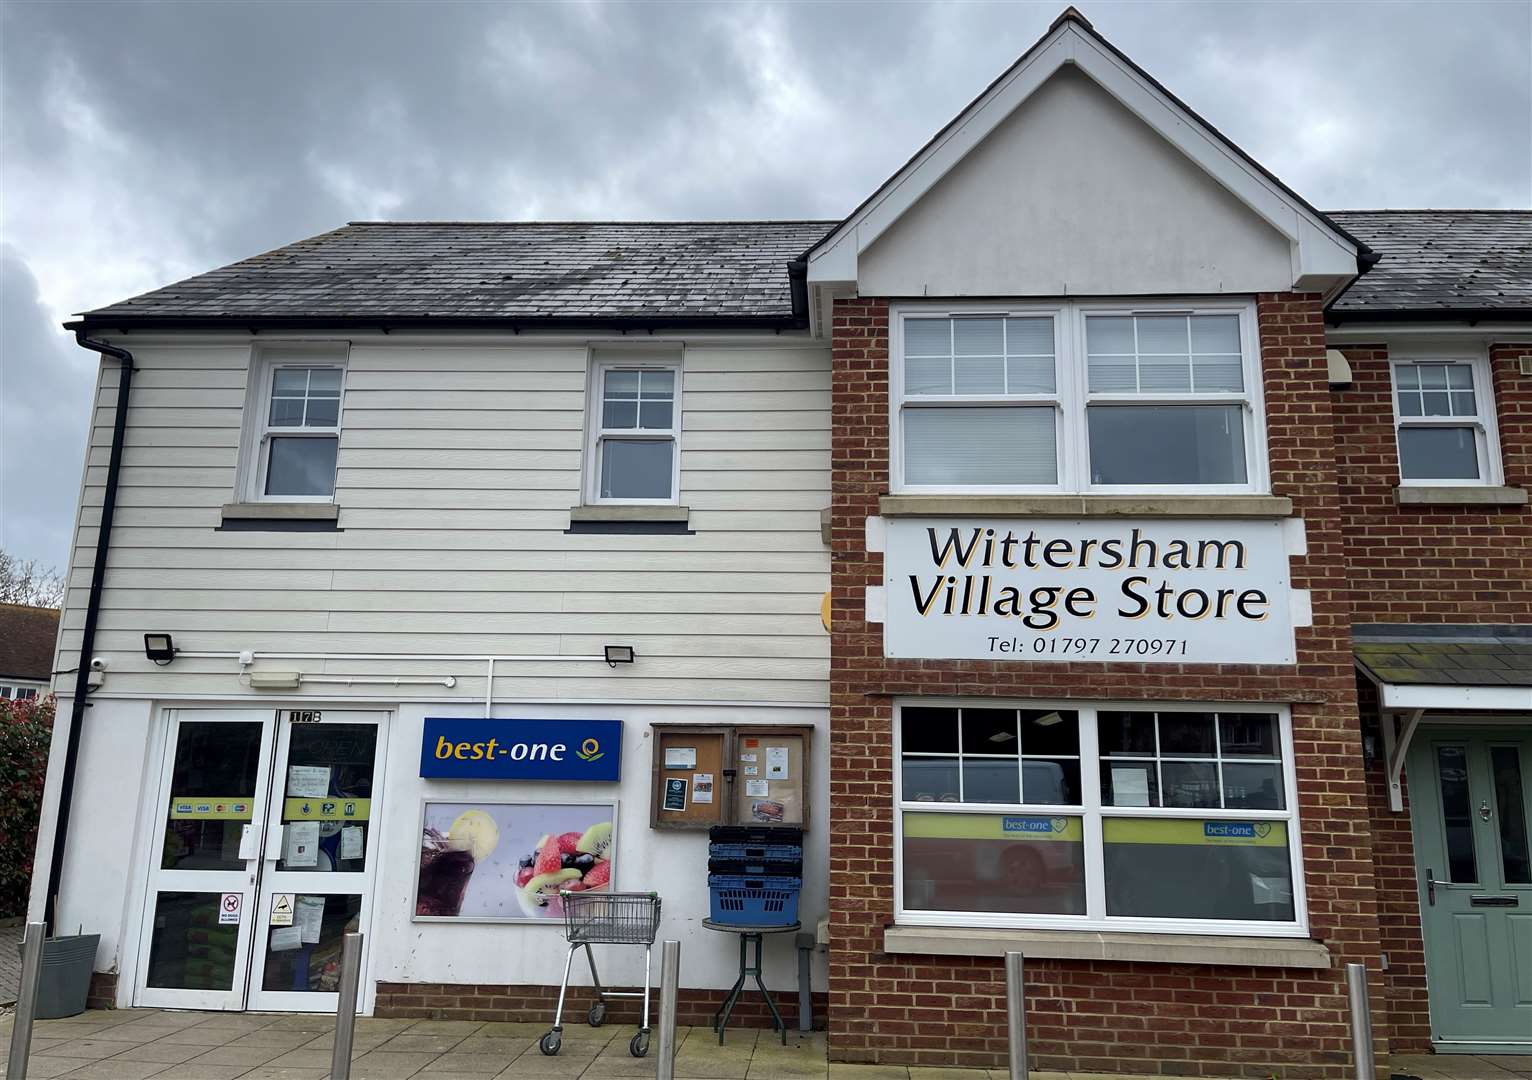 Daxesh Patel, owner of Wittersham Village Store, says the closure in Poplar Road is impacting business